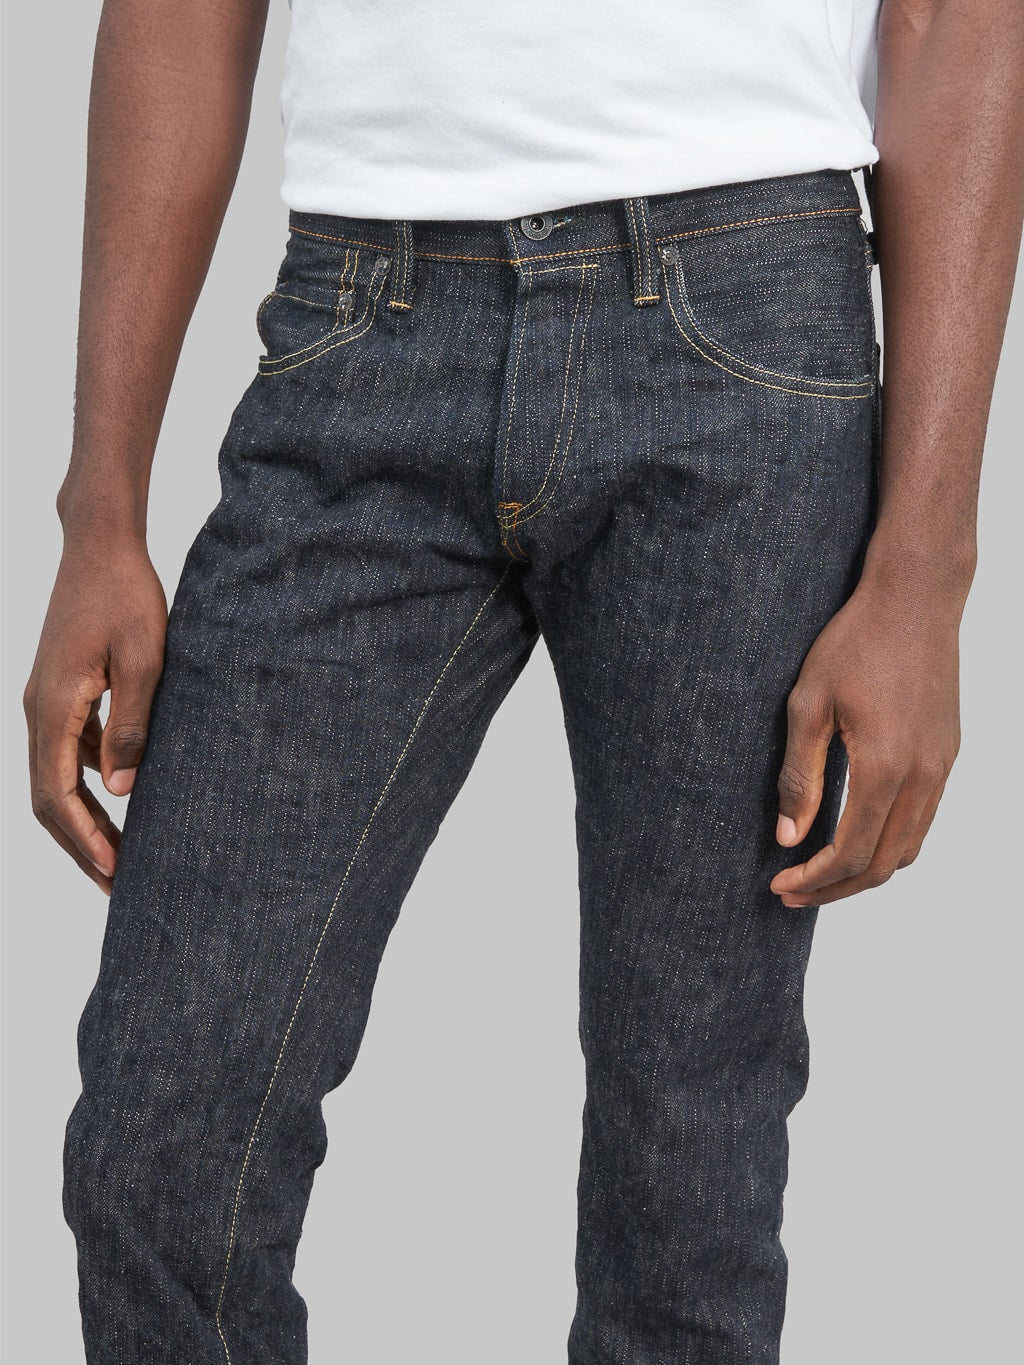 Oni denim kihannen relaxed tapered jeans front rise